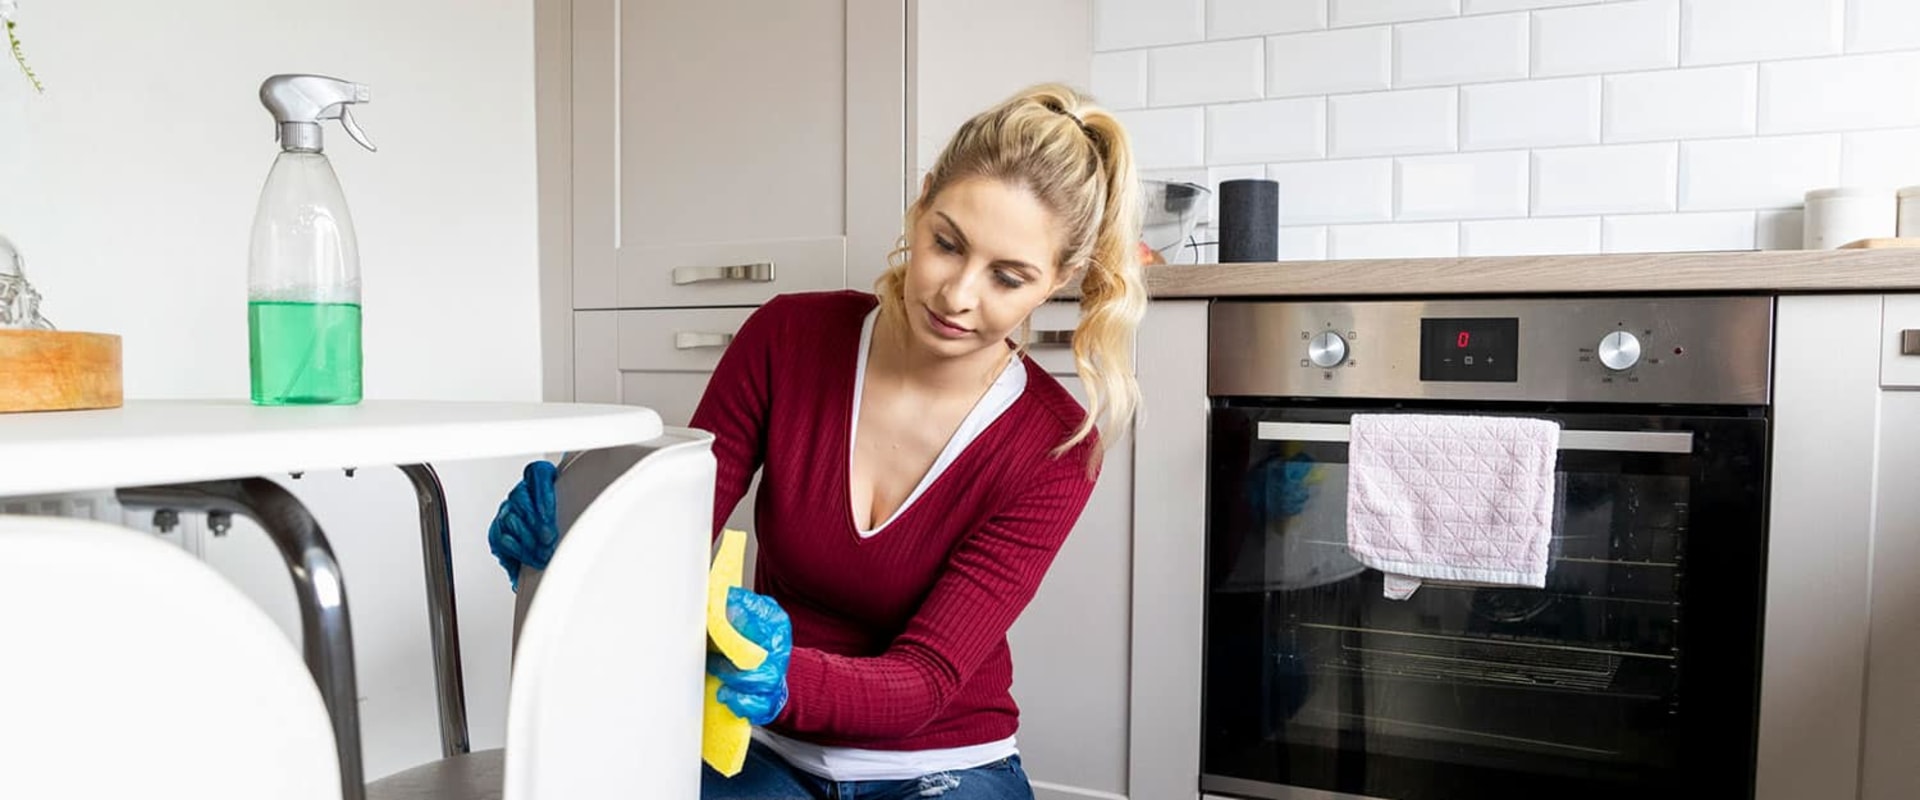 How long should a deep clean of a kitchen take?